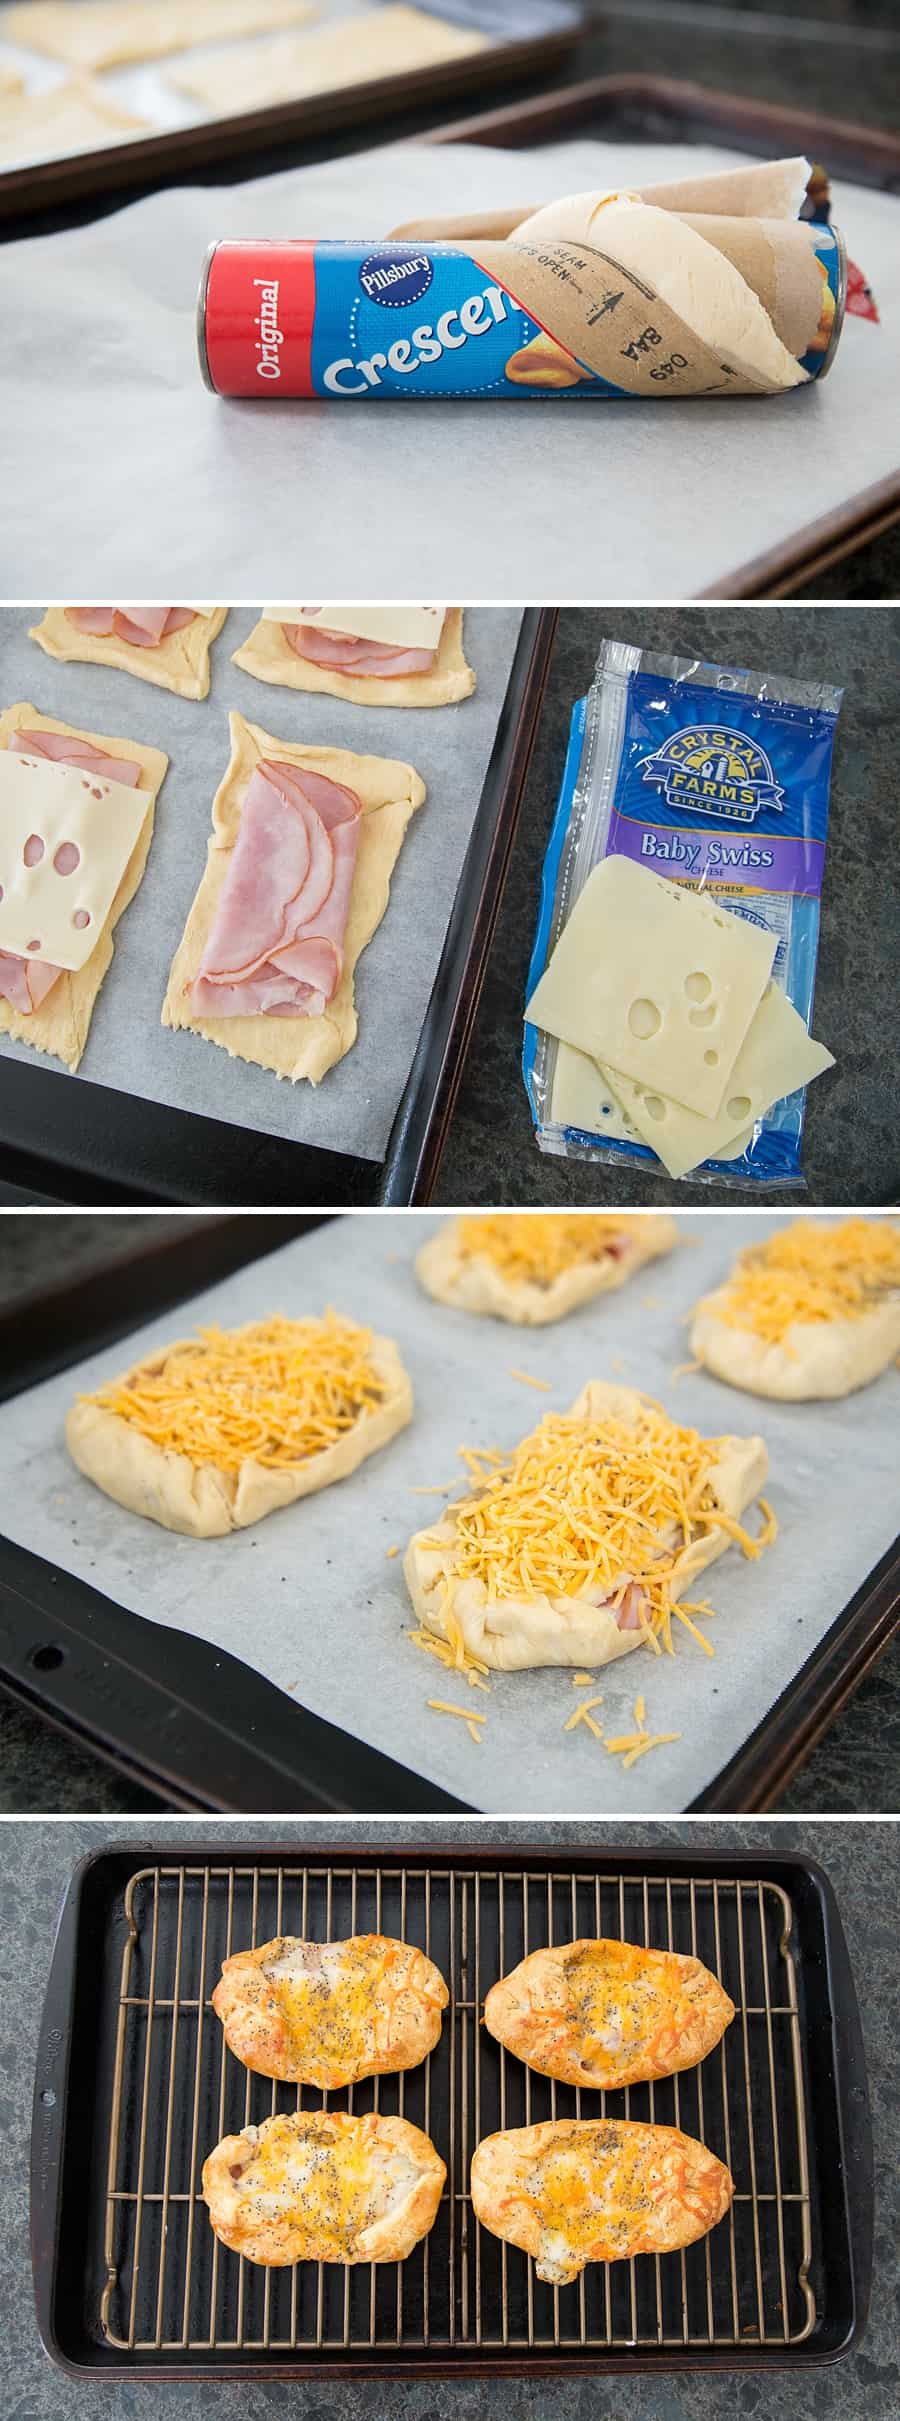 These Ham & Cheese Crescent Puffs are the perfect family-friendly brunch recipe. Wether you're looking for a delicious breakfast snack or something special for a holiday party, this simple recipe is perfect. *This sounds amazing. Love the mustard glaze recipe too. Bookmarking this for Easter.